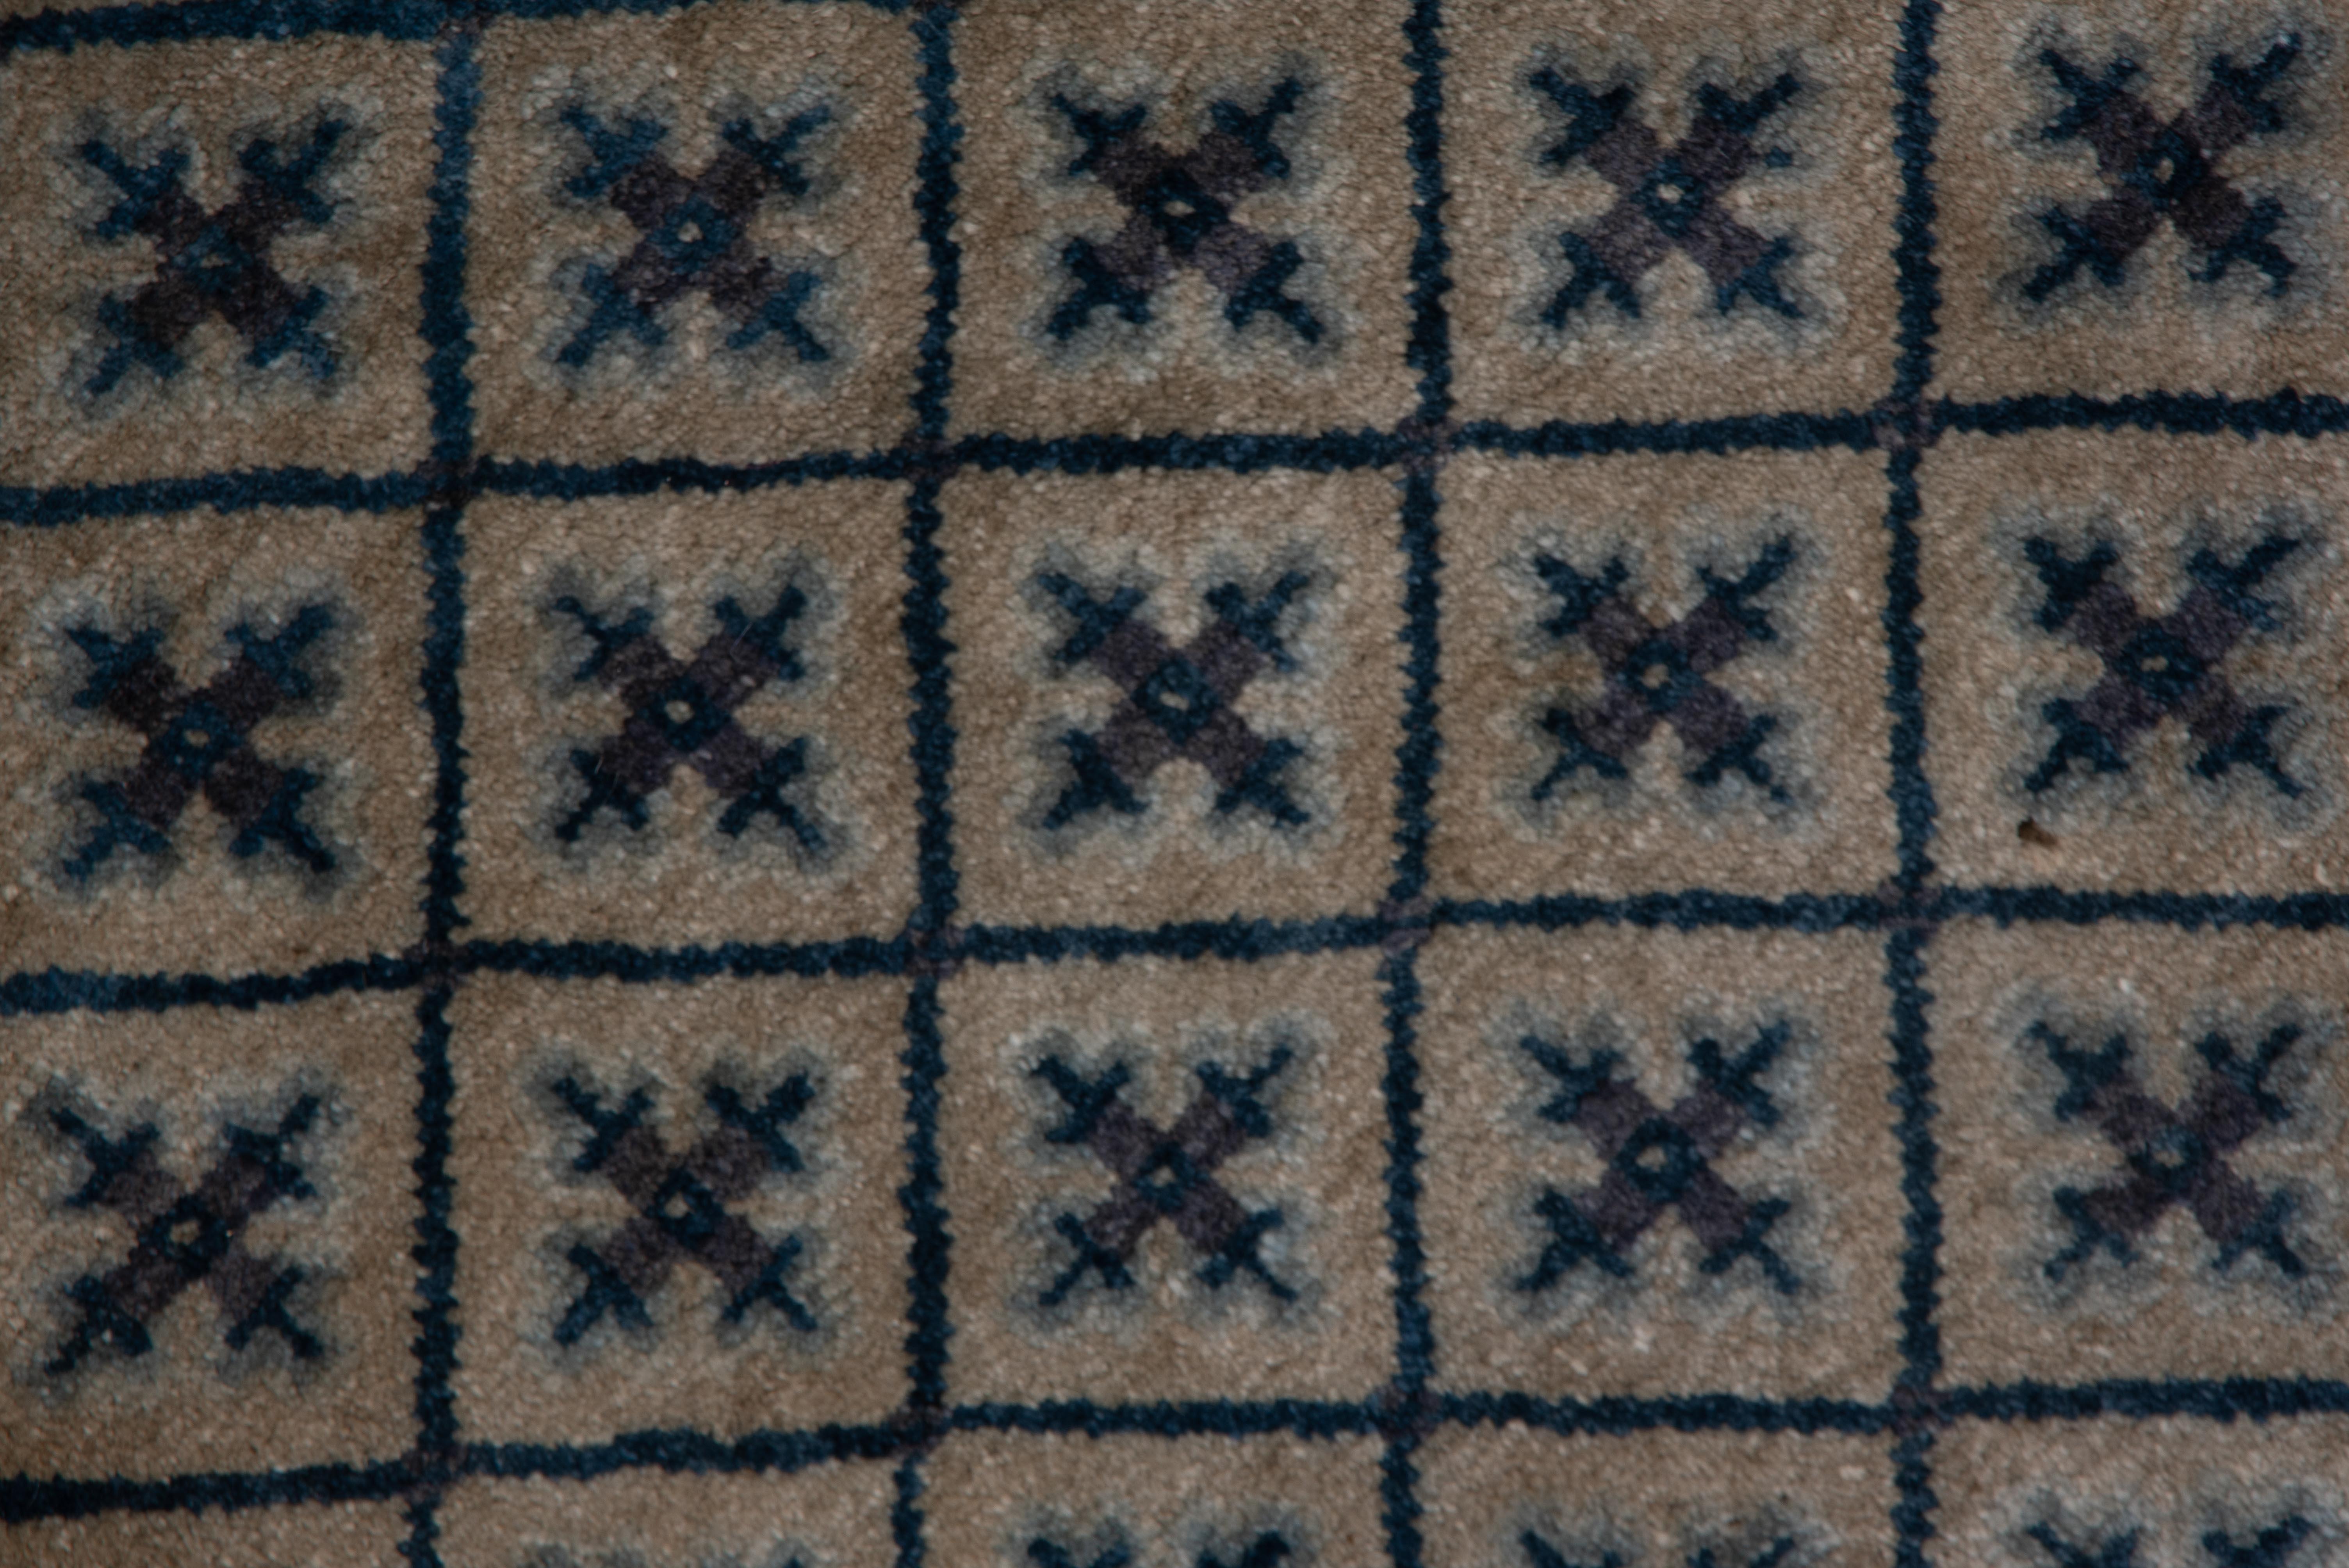 Chinese Export Antique Chinese Rug with Geometric Patterns Allover - Green Blue Khakis For Sale